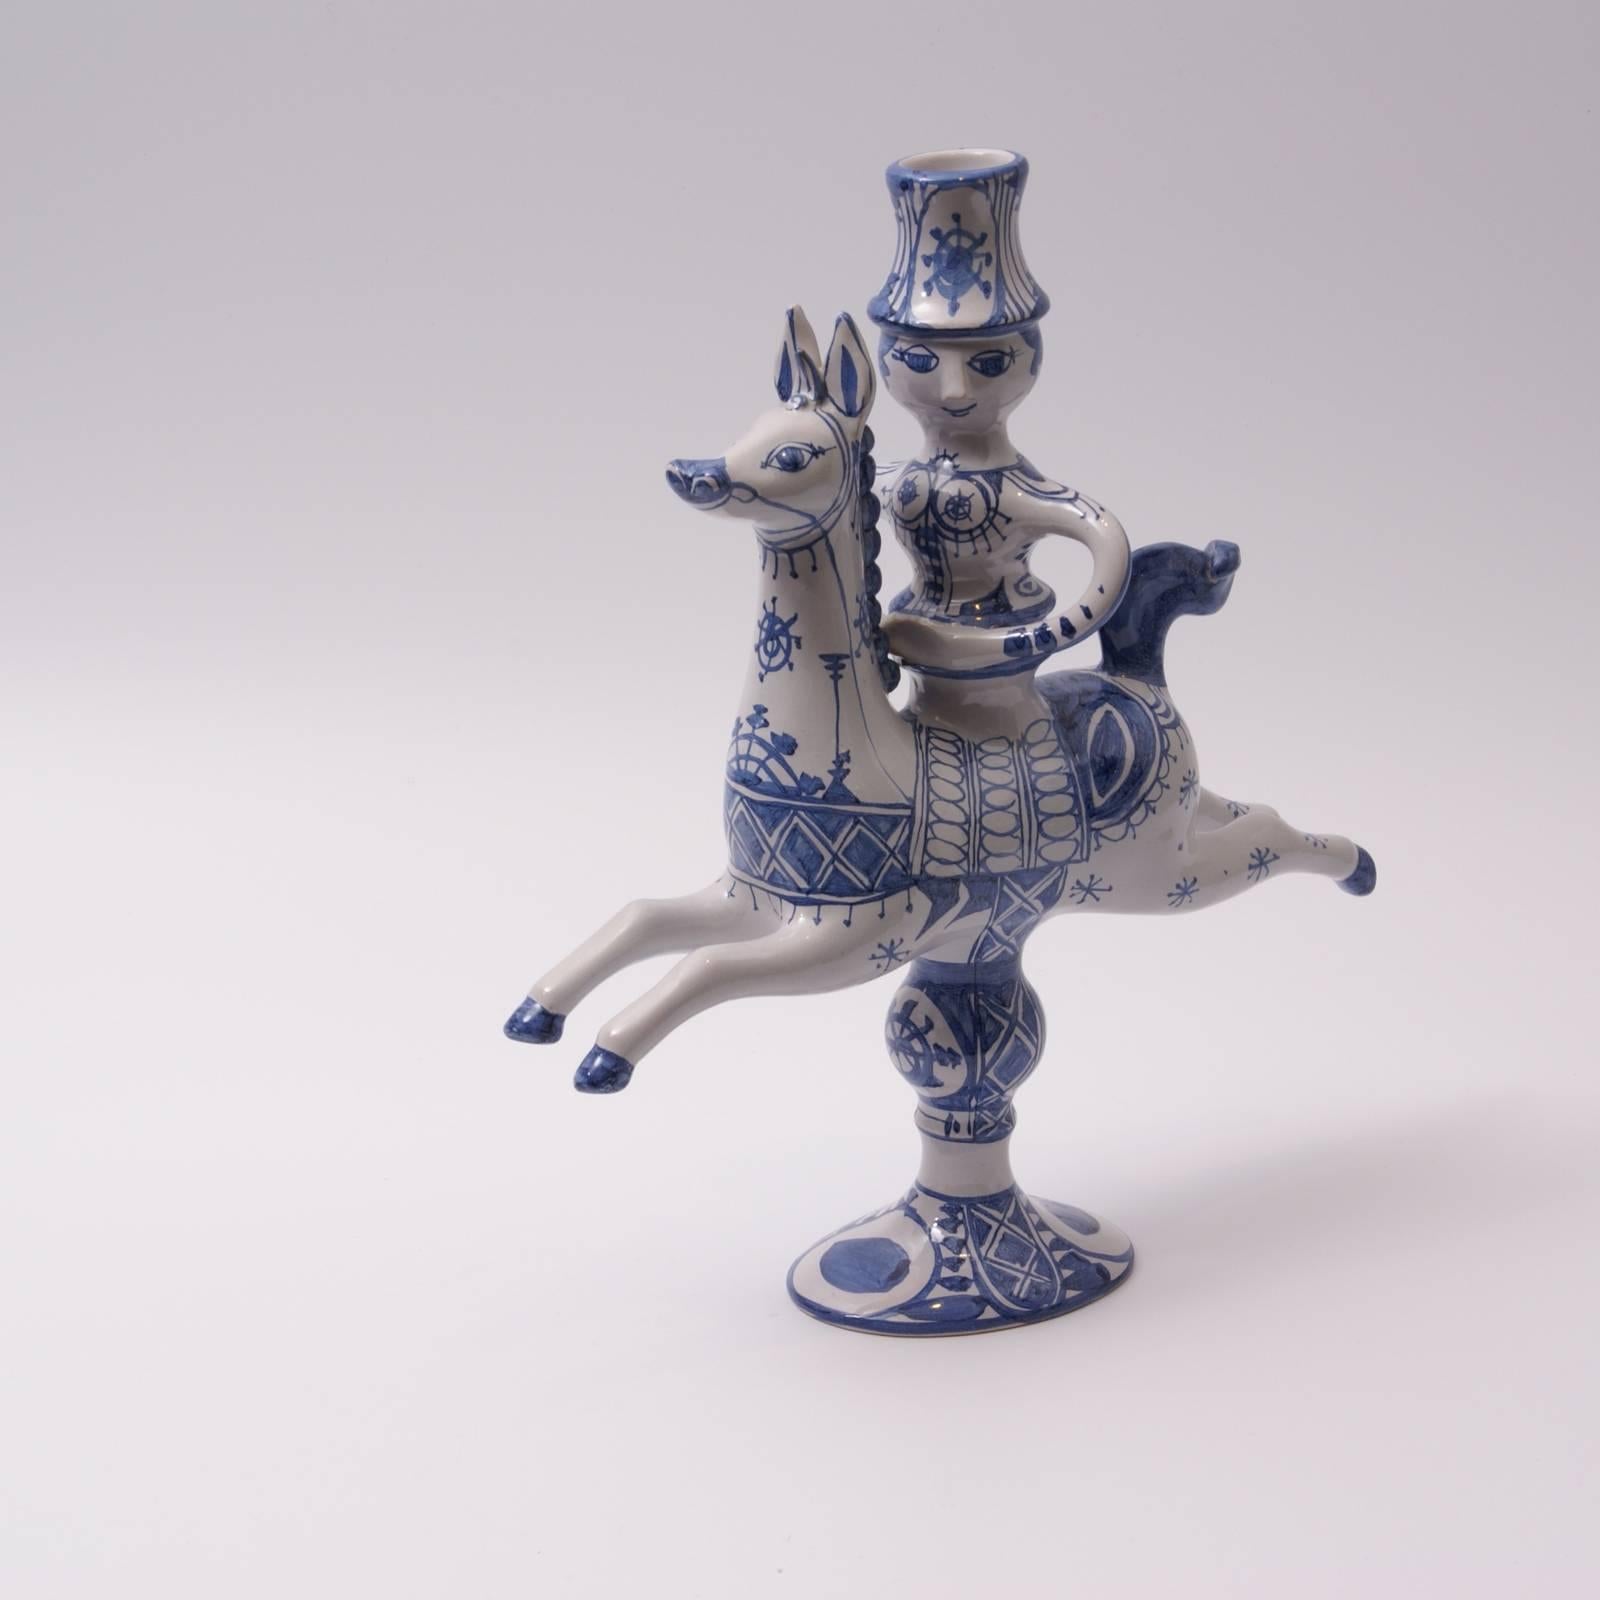 Earthenware candlestick shaped as a horse by Björn Wiinblad, perfect condition, signed and dated 1989.